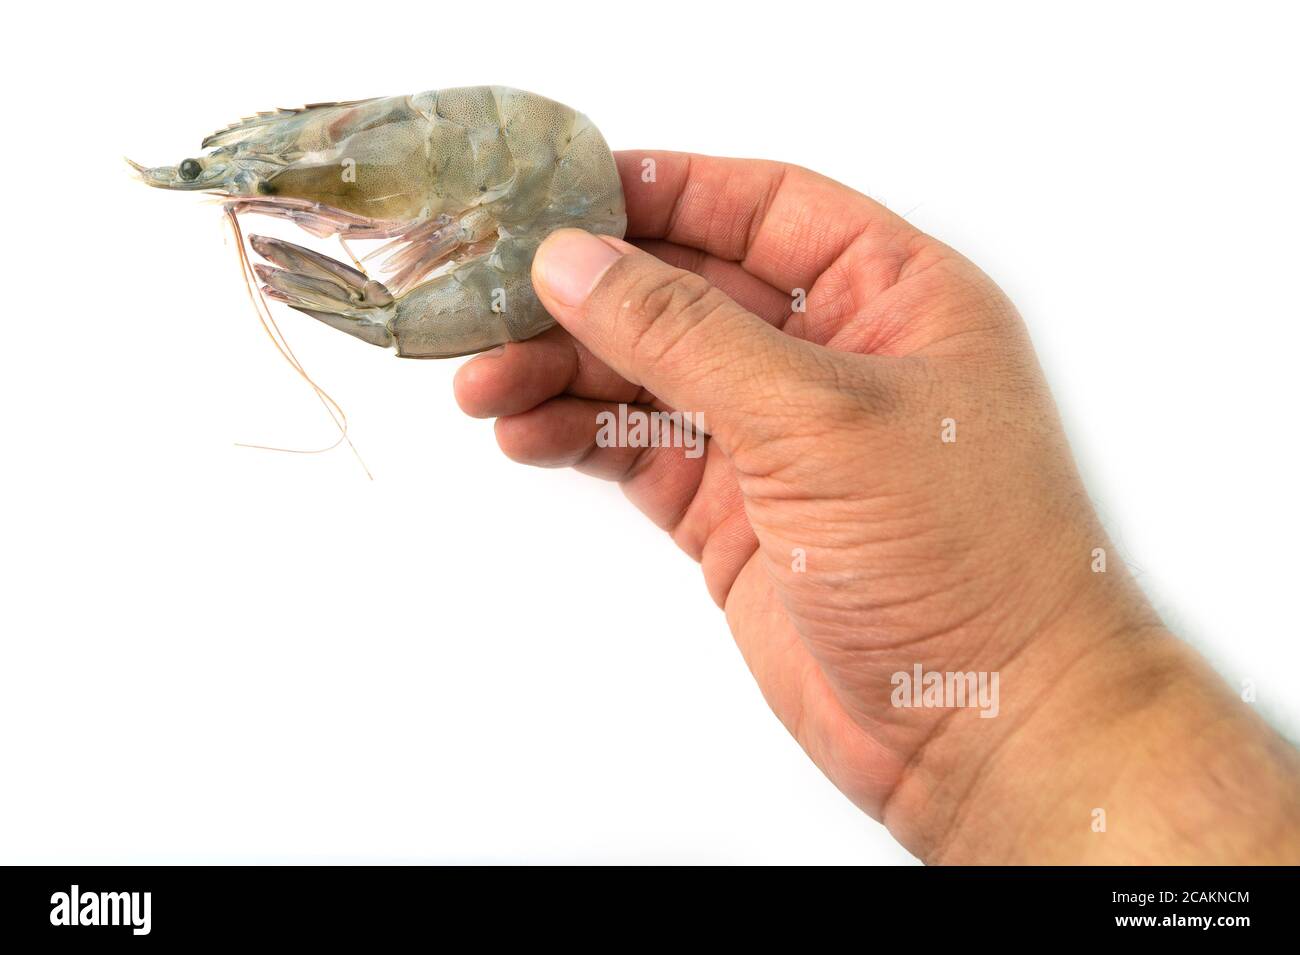 The hands of men are holding fresh raw pacific white shrimp on white background. Stock Photo